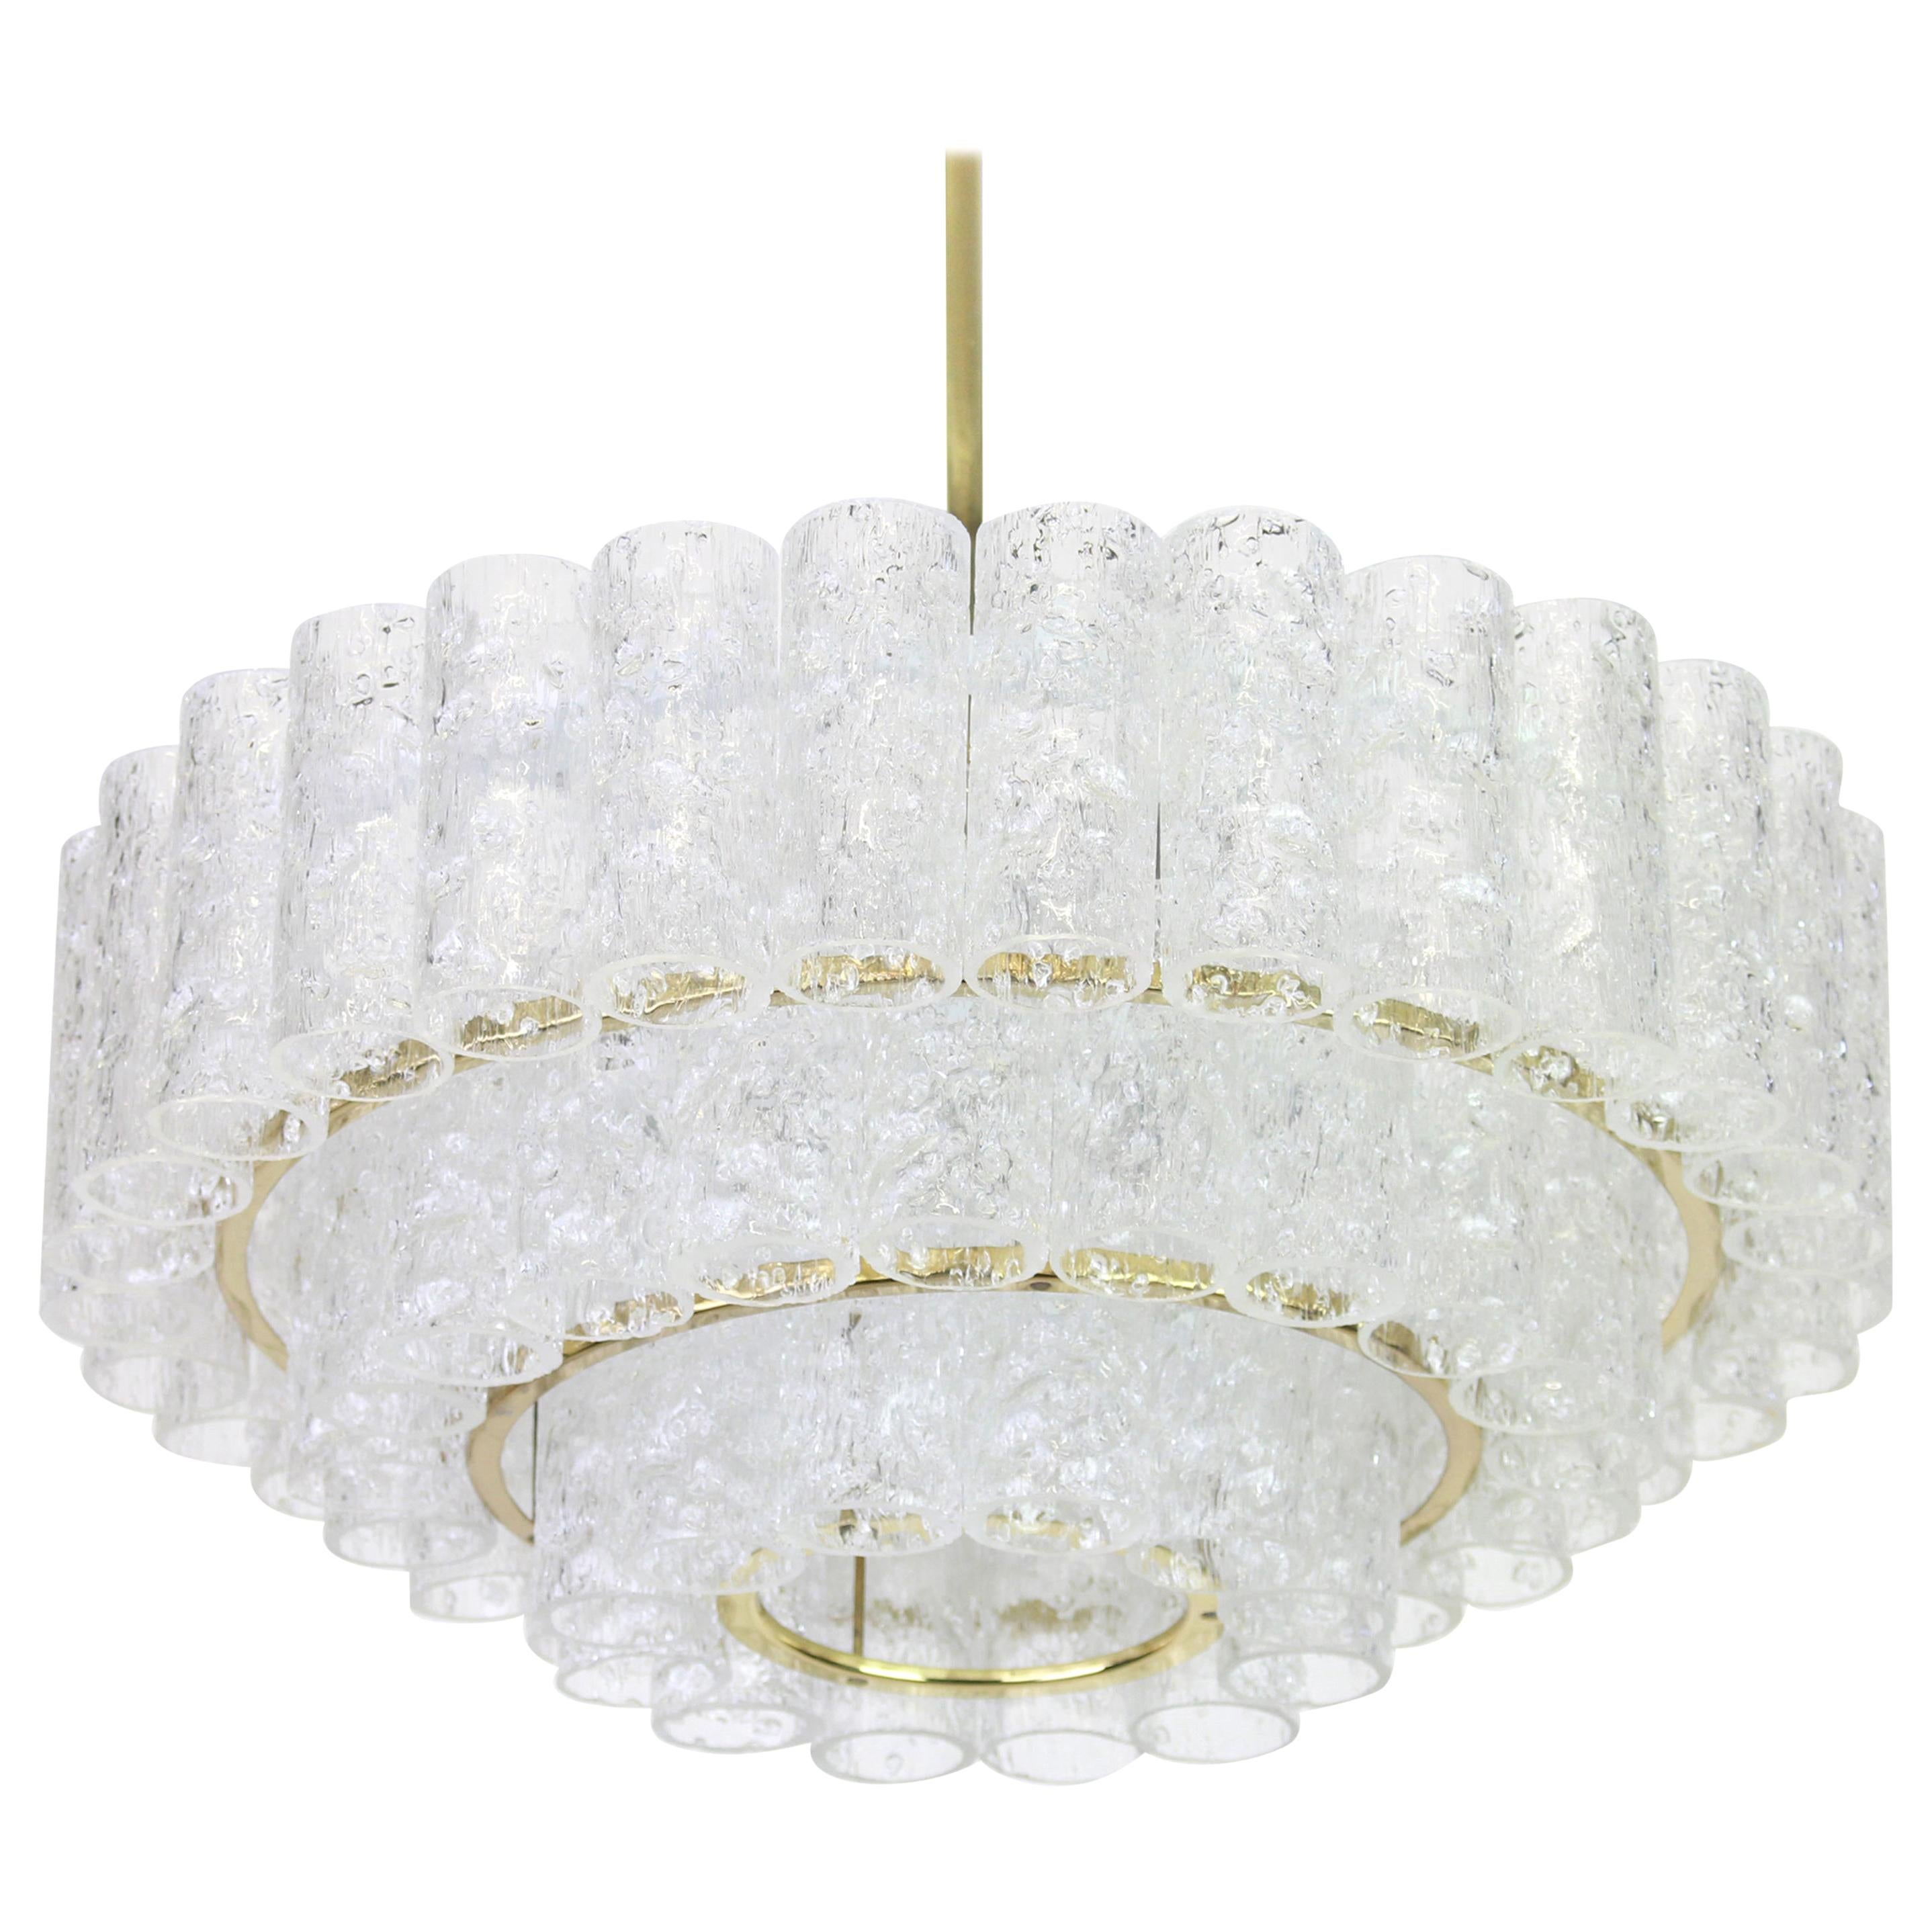 1 of 2 Stunning Murano Ice Glass Tubes Chandelier by Doria, Germany, 1960s For Sale